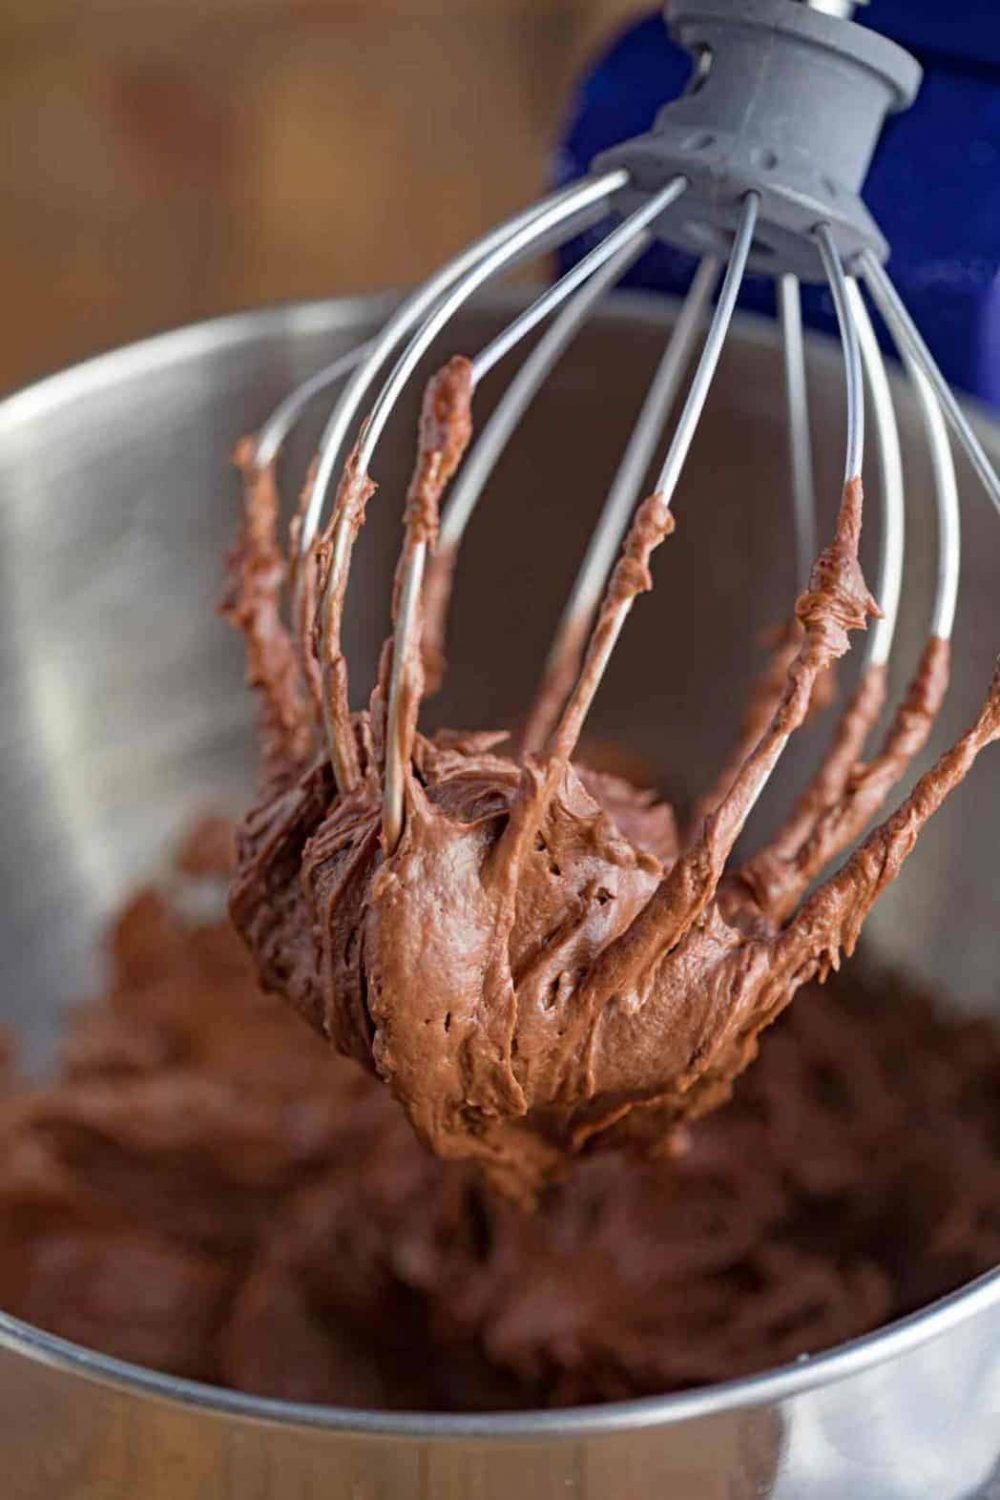 Decadent Chocolate Bliss: Irresistible Rich Chocolate Frosting